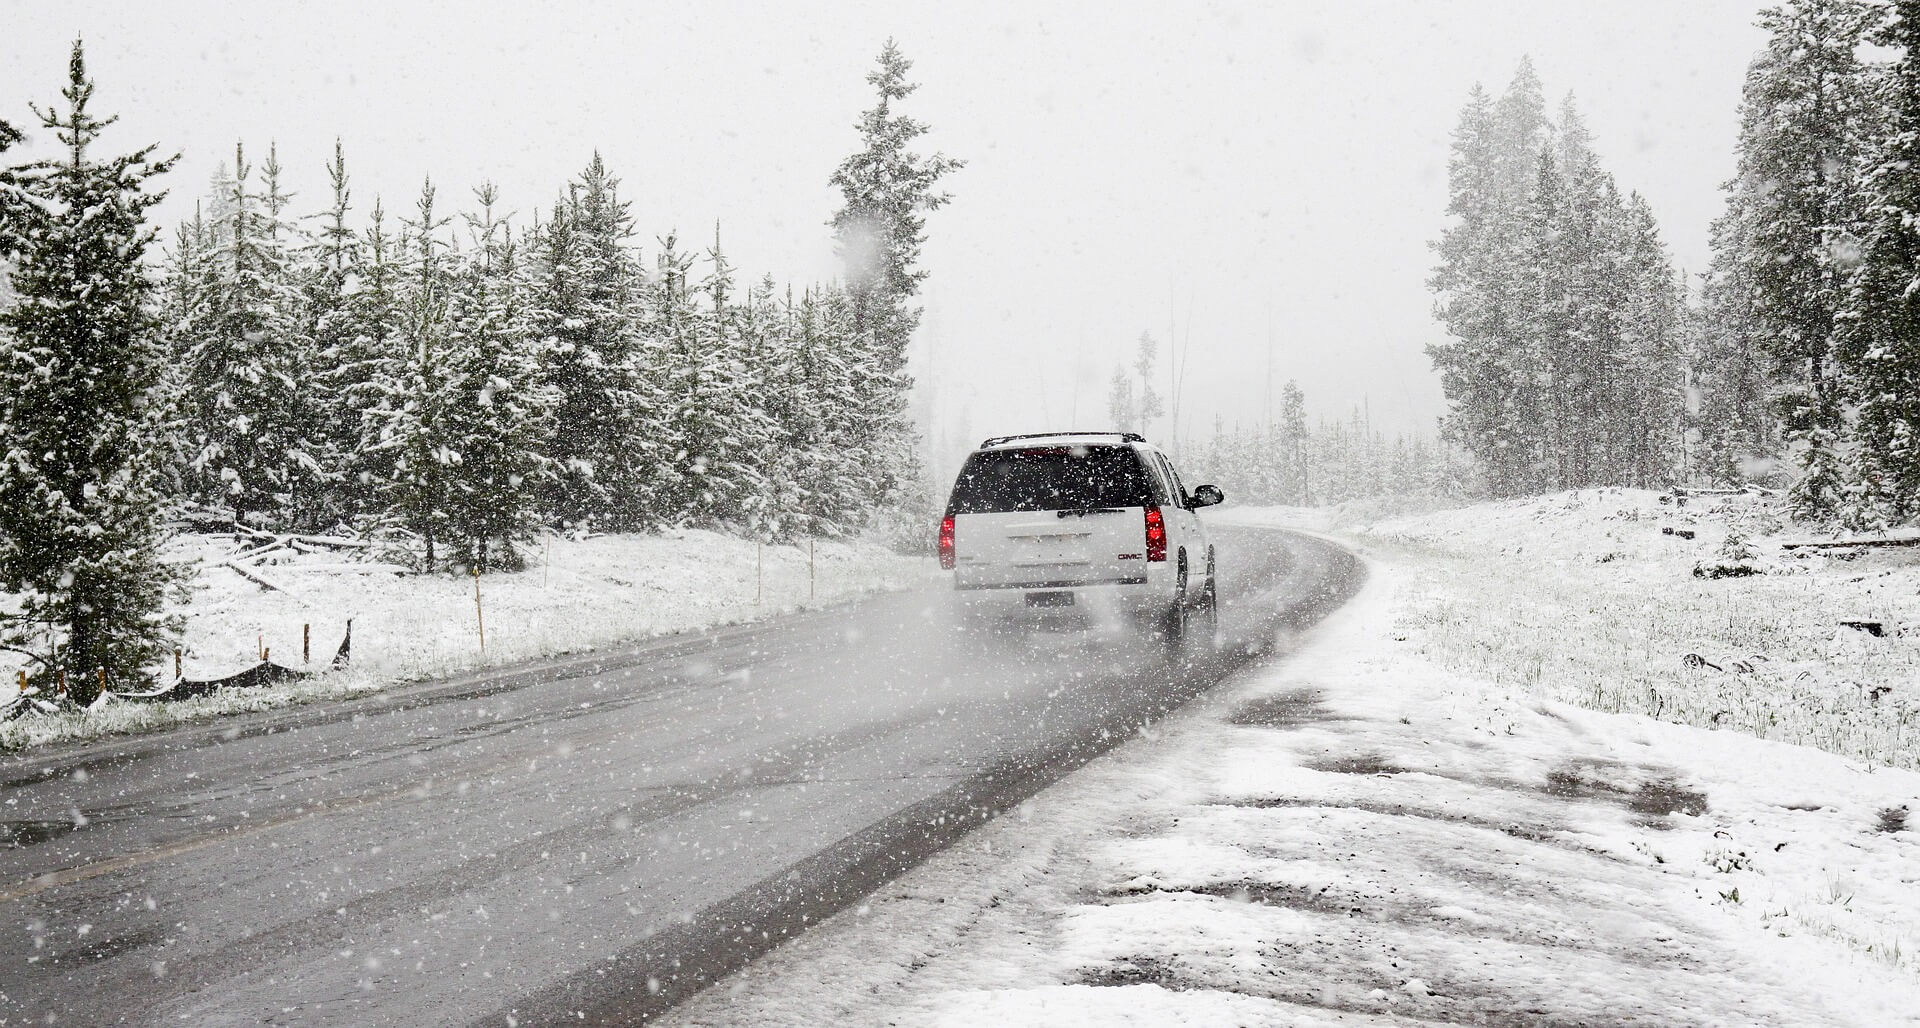 Driving in Snow? Here Are 8 Life-saving Tips!